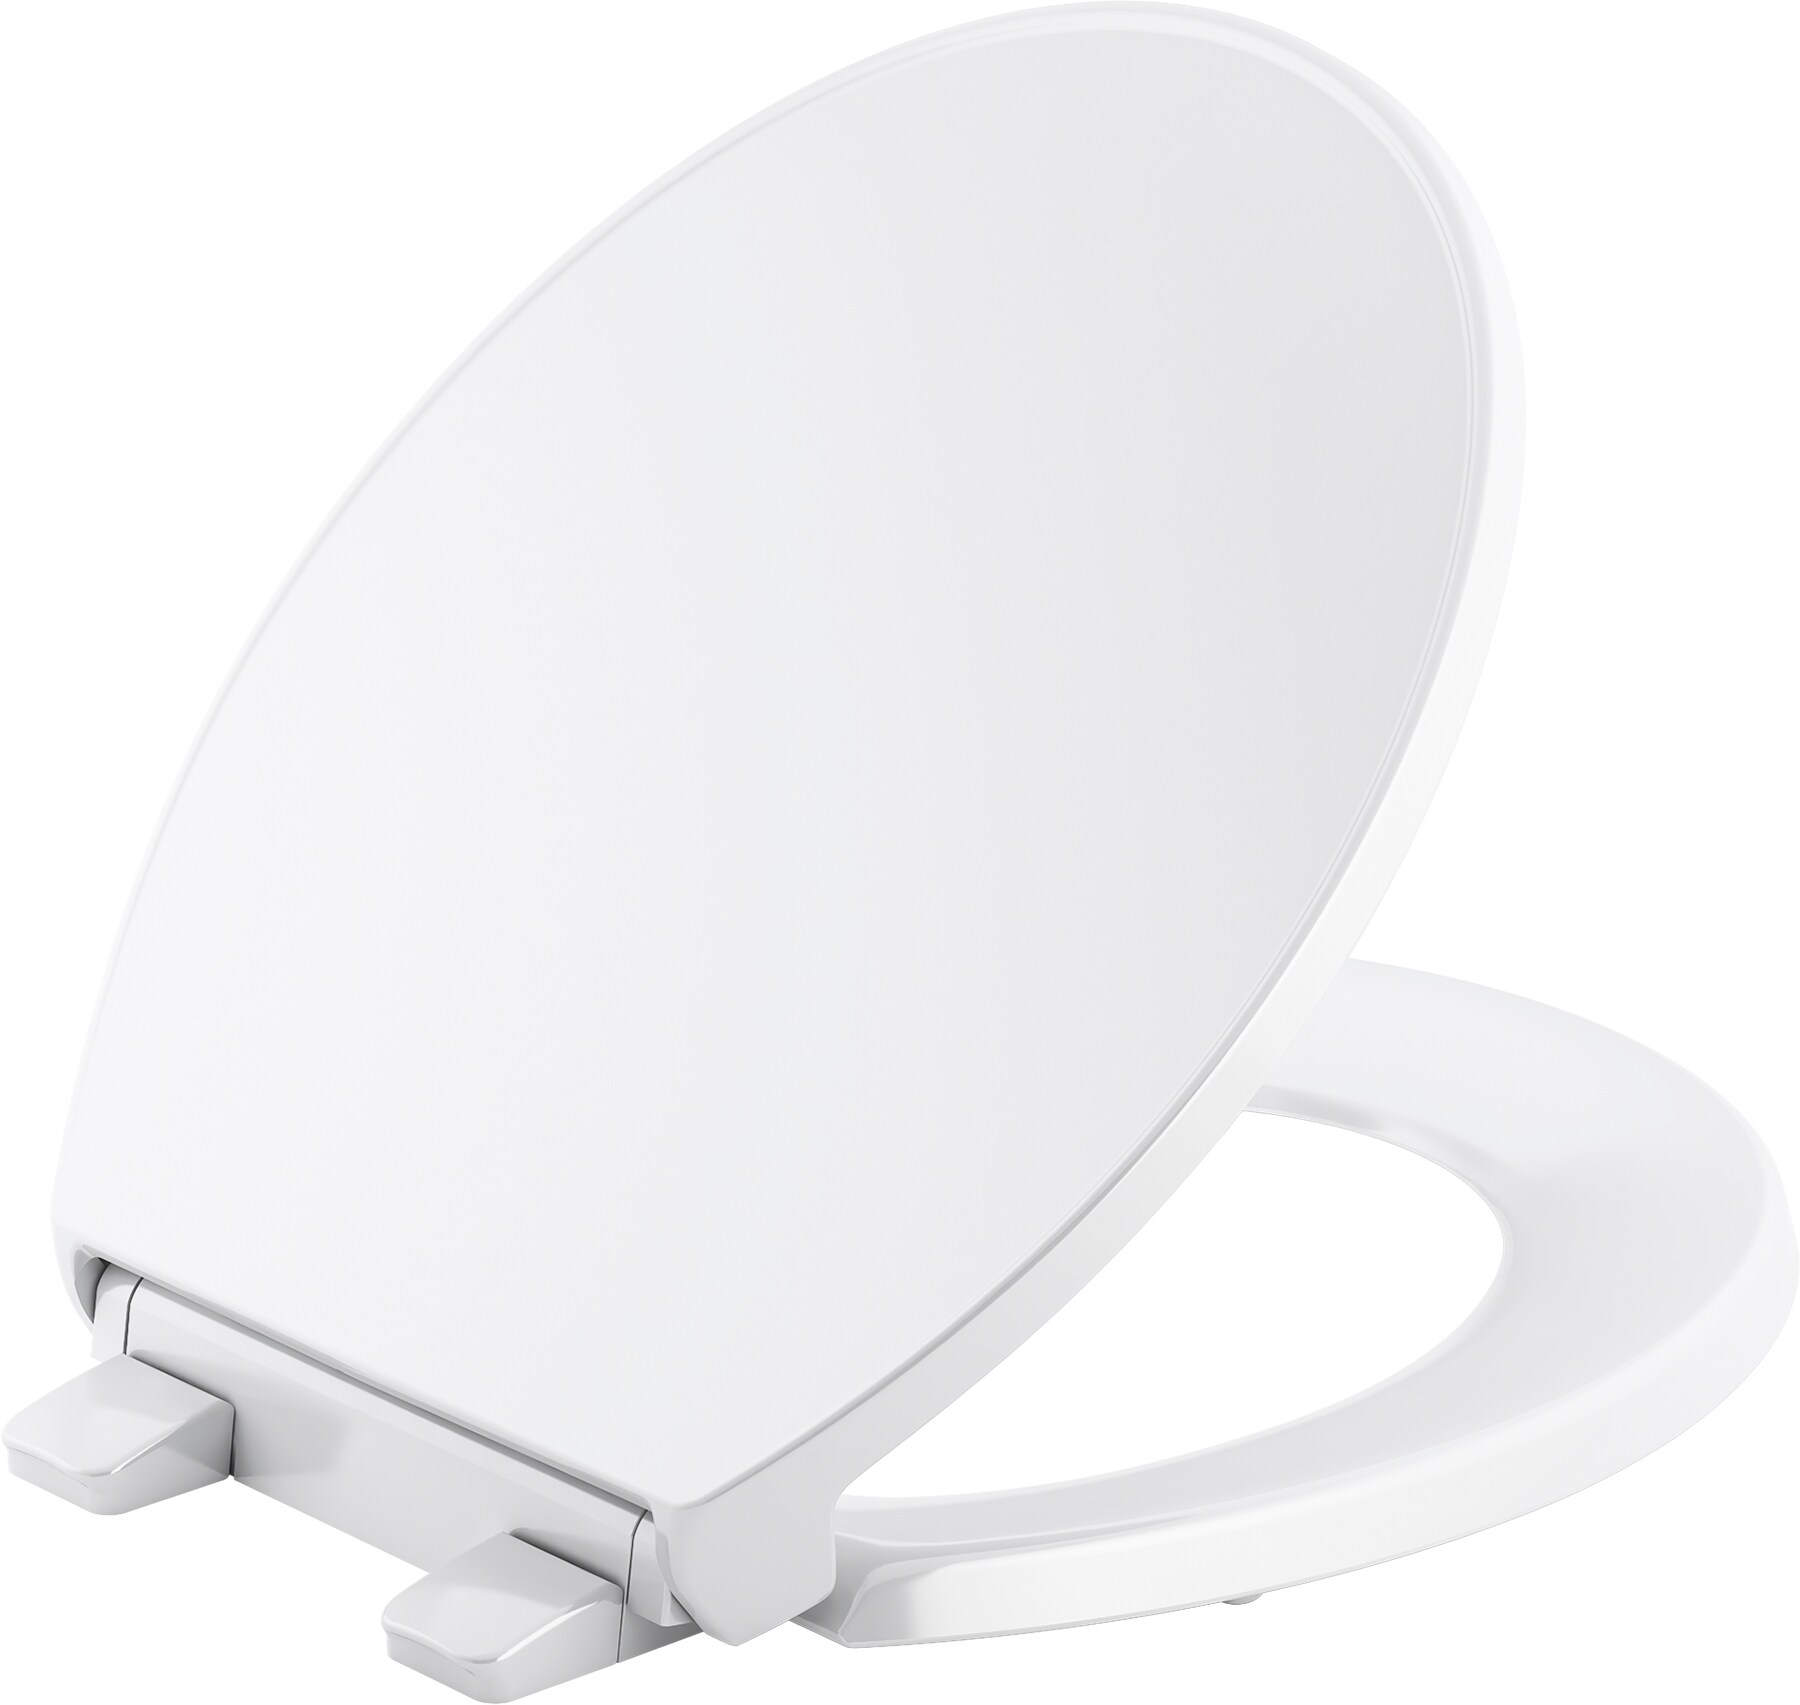 Kohler Elongated Closed Front Toilet Seat Quiet Soft Cover White Wood Hardware 